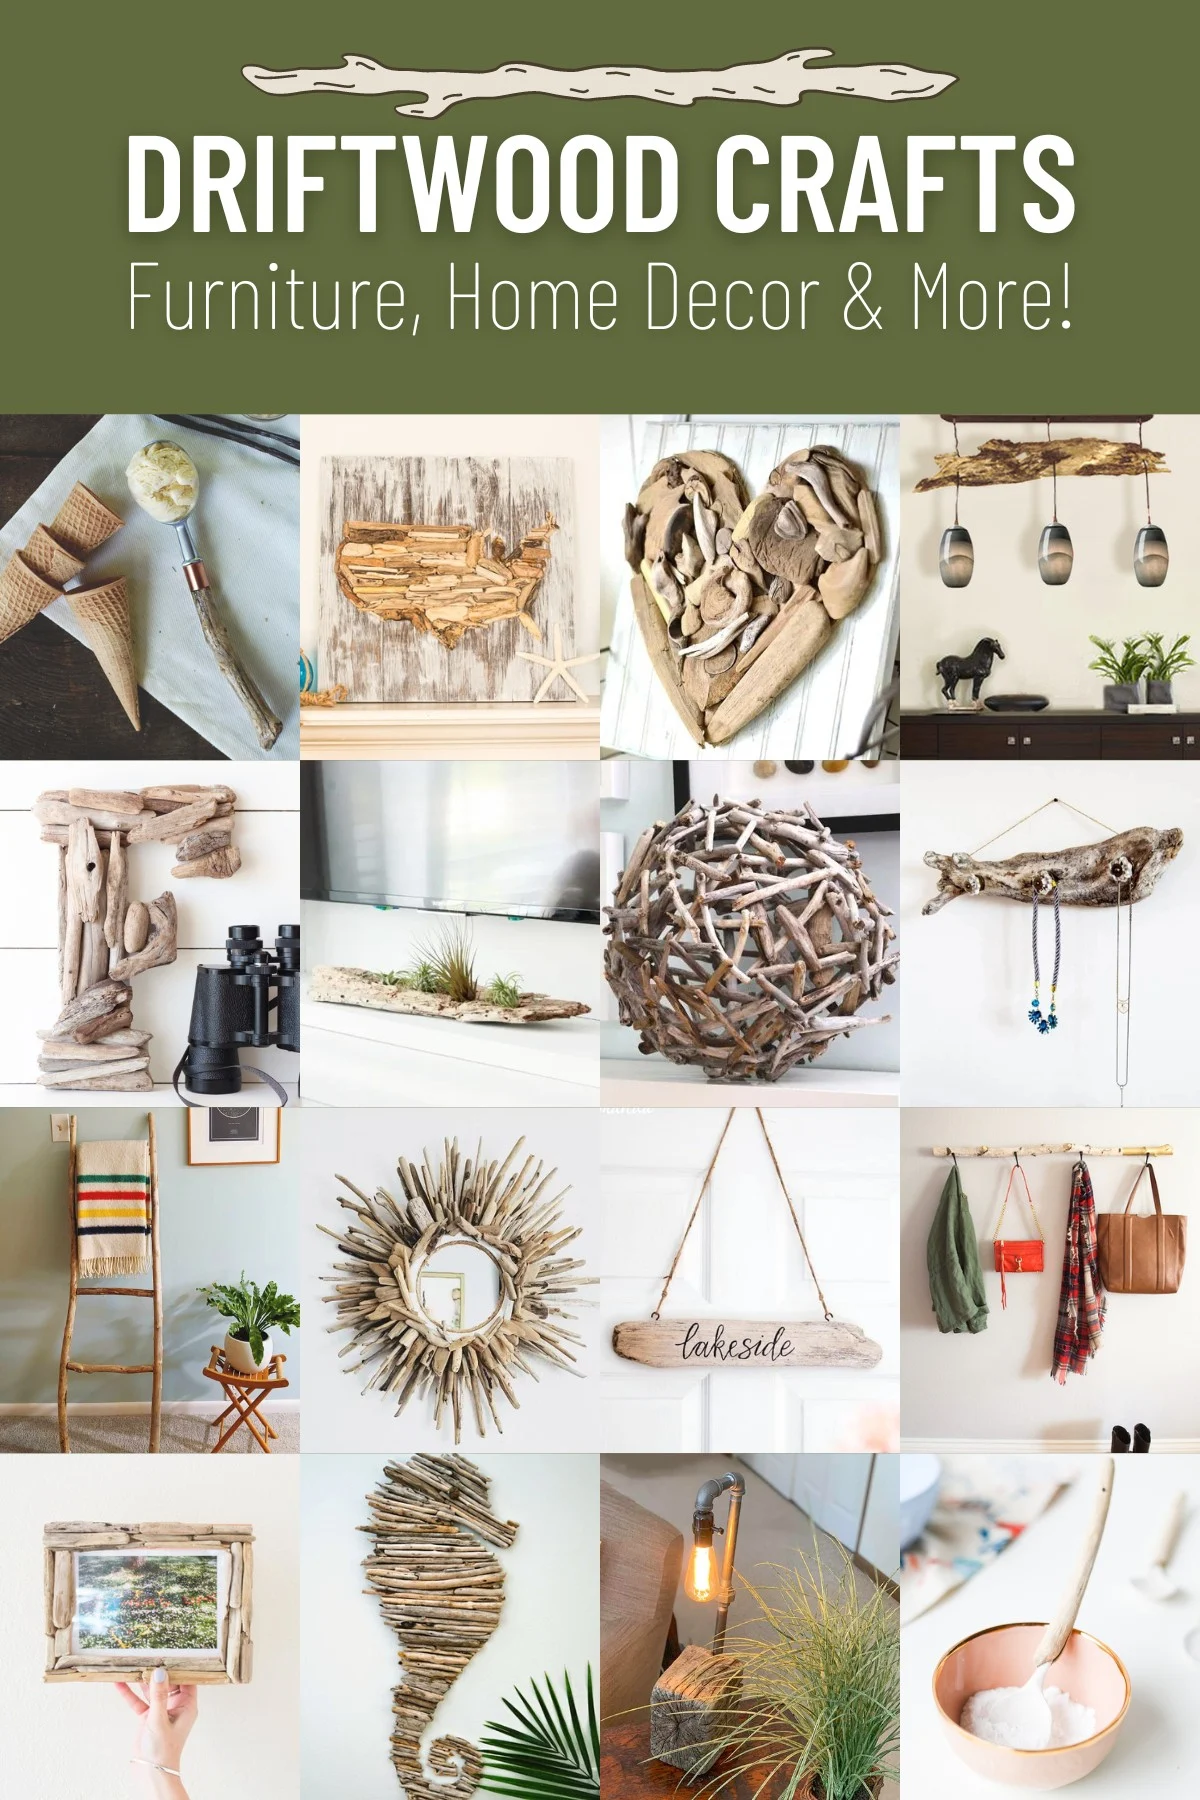 Driftwood Crafts for a rustic beachy theme decor